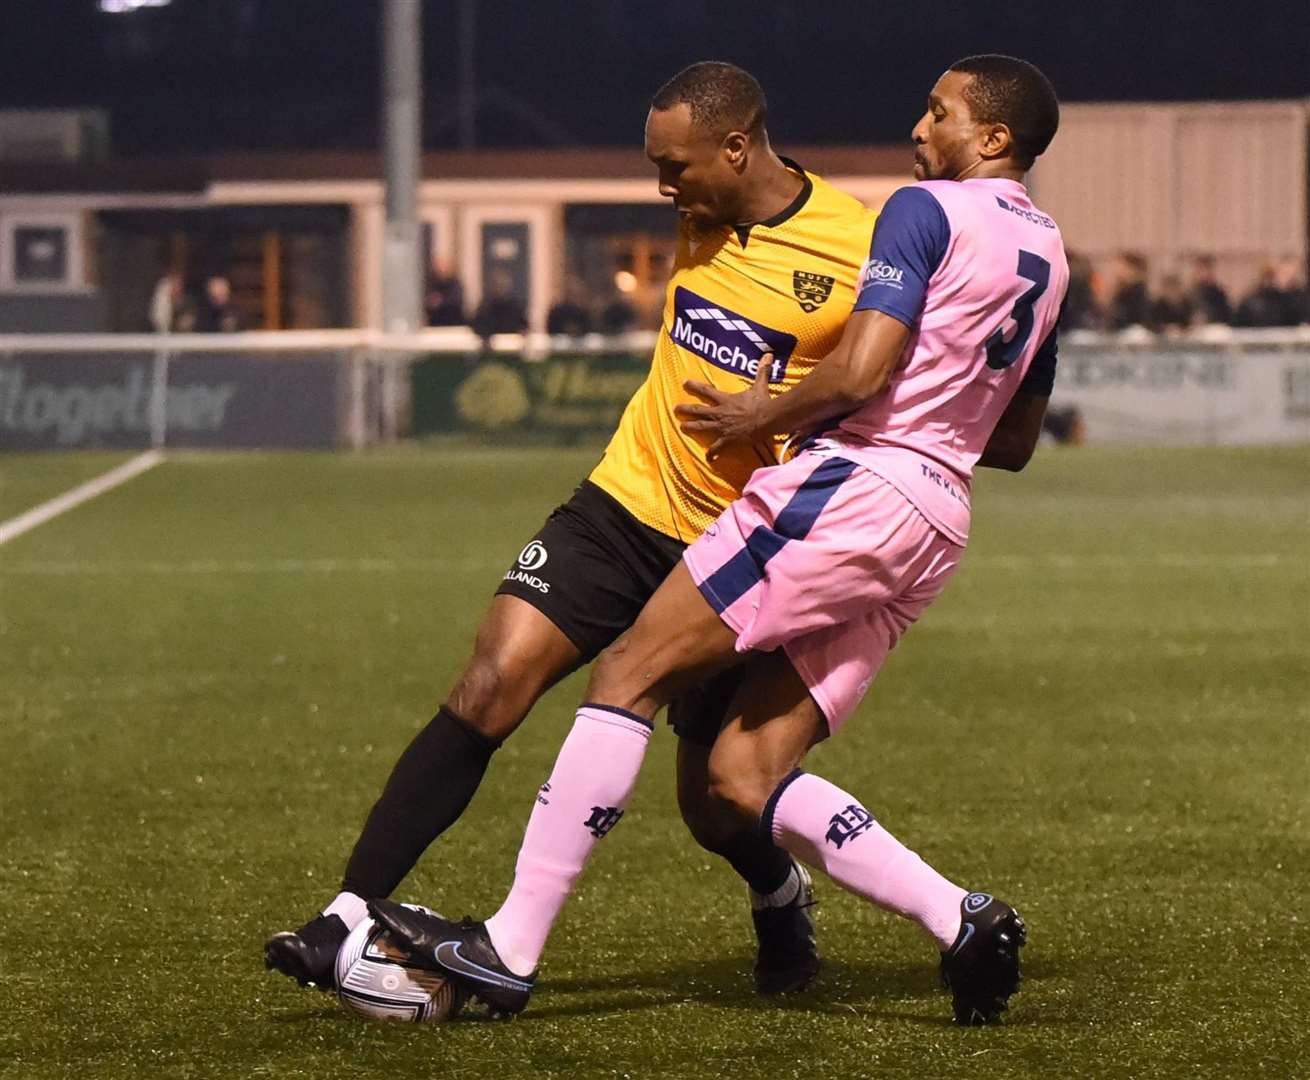 Maidstone captain Gavin Hoyte battles with Dulwich's Tyrone Sterling during the Stones' win on Tuesday. Picture: Steve Terrell